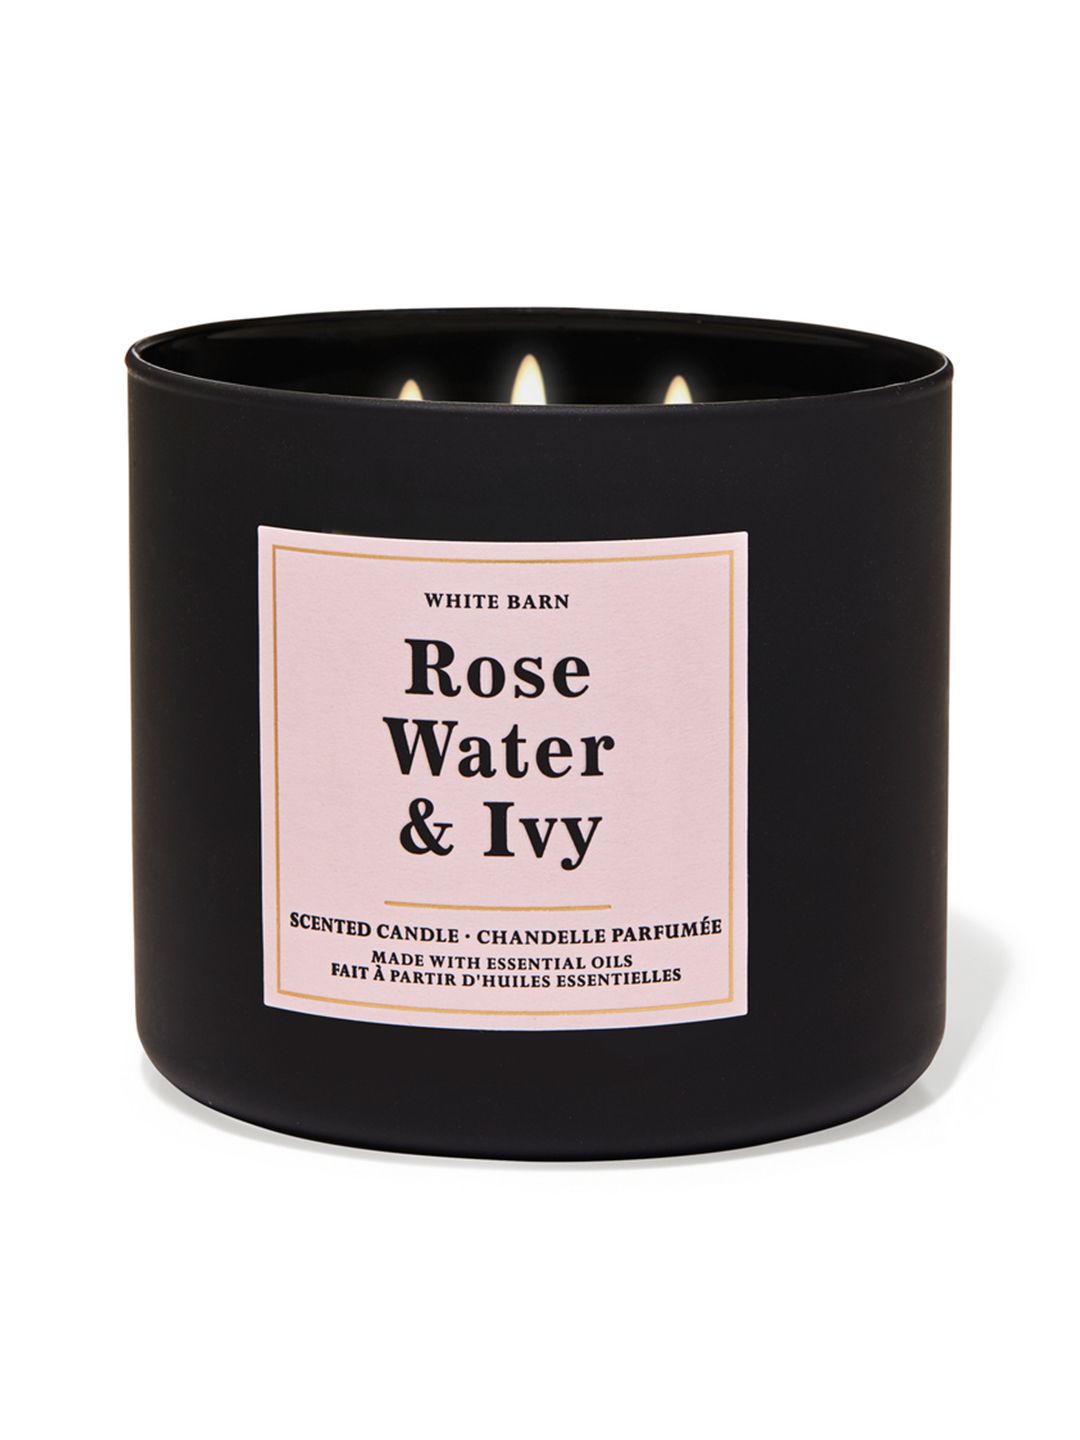 Bath & Body Works Rose Water & Ivy 3-Wick Candle 411 g Price in India